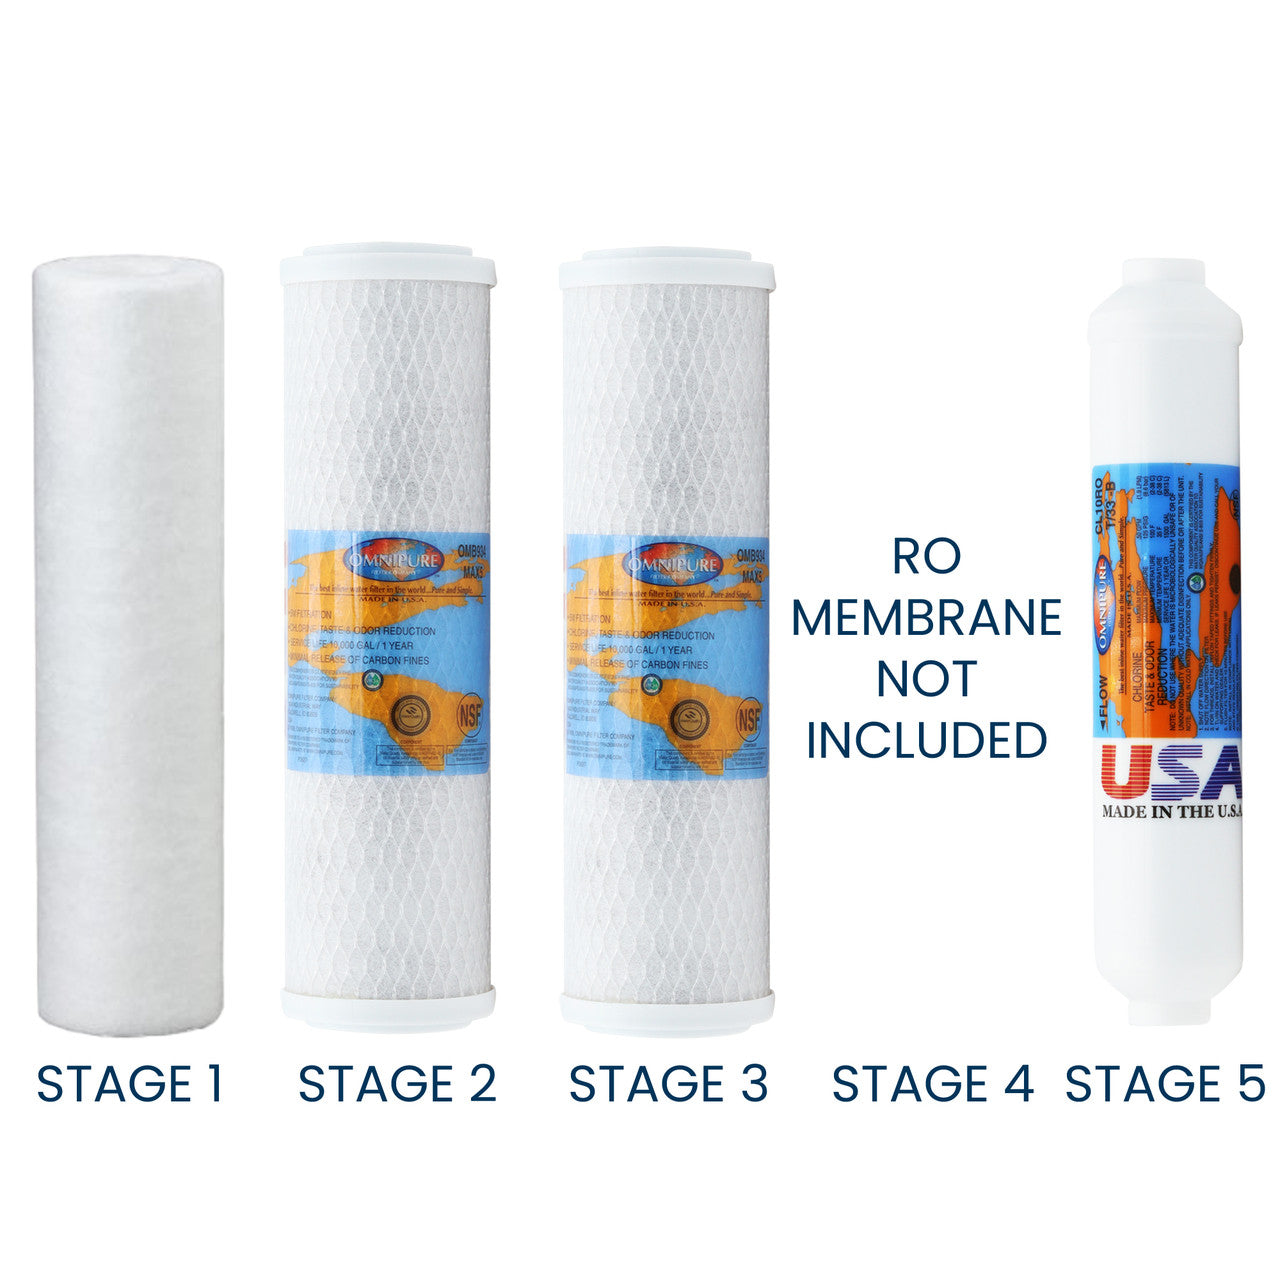 Replacement Filter Kit compatible with Proline Plus Reverse Osmosis System RO Membrane Sold Separately YS-PROPLUS